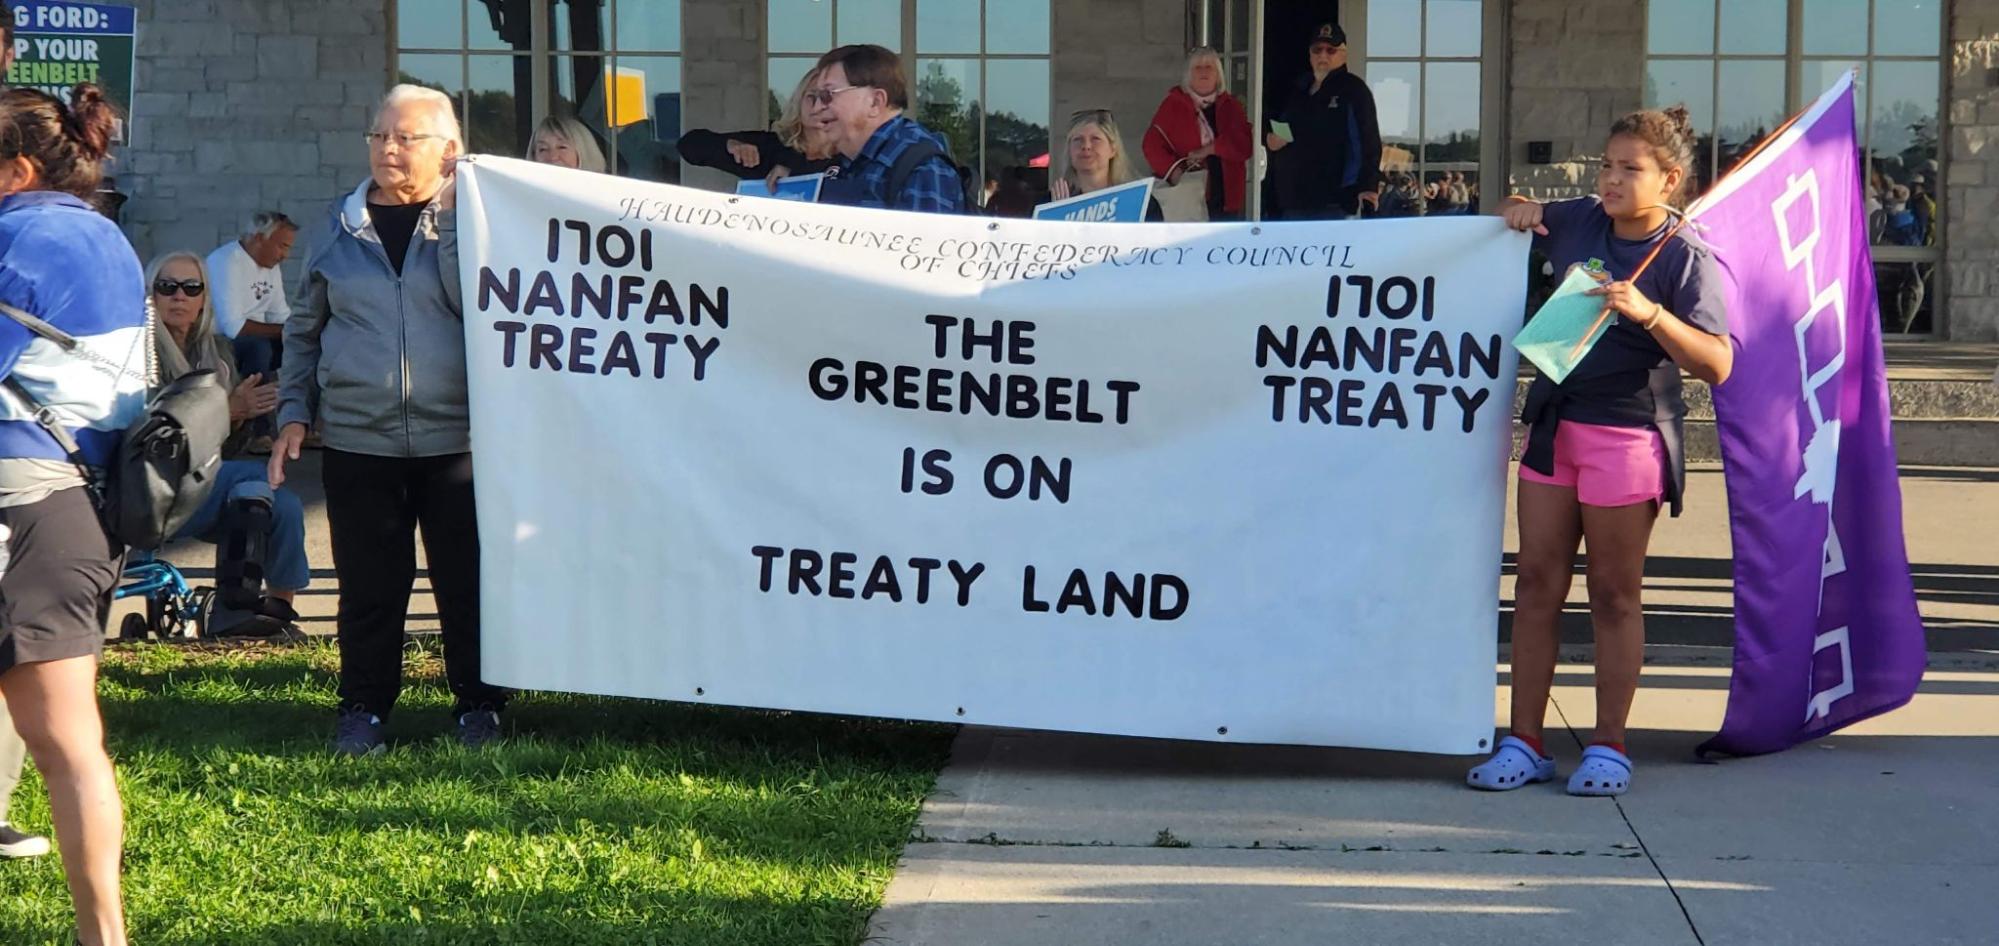 A group of Indigenous people holding up a banner that says "The Greenbelt is on Treaty Land, Nanfan Treaty." End of image description.